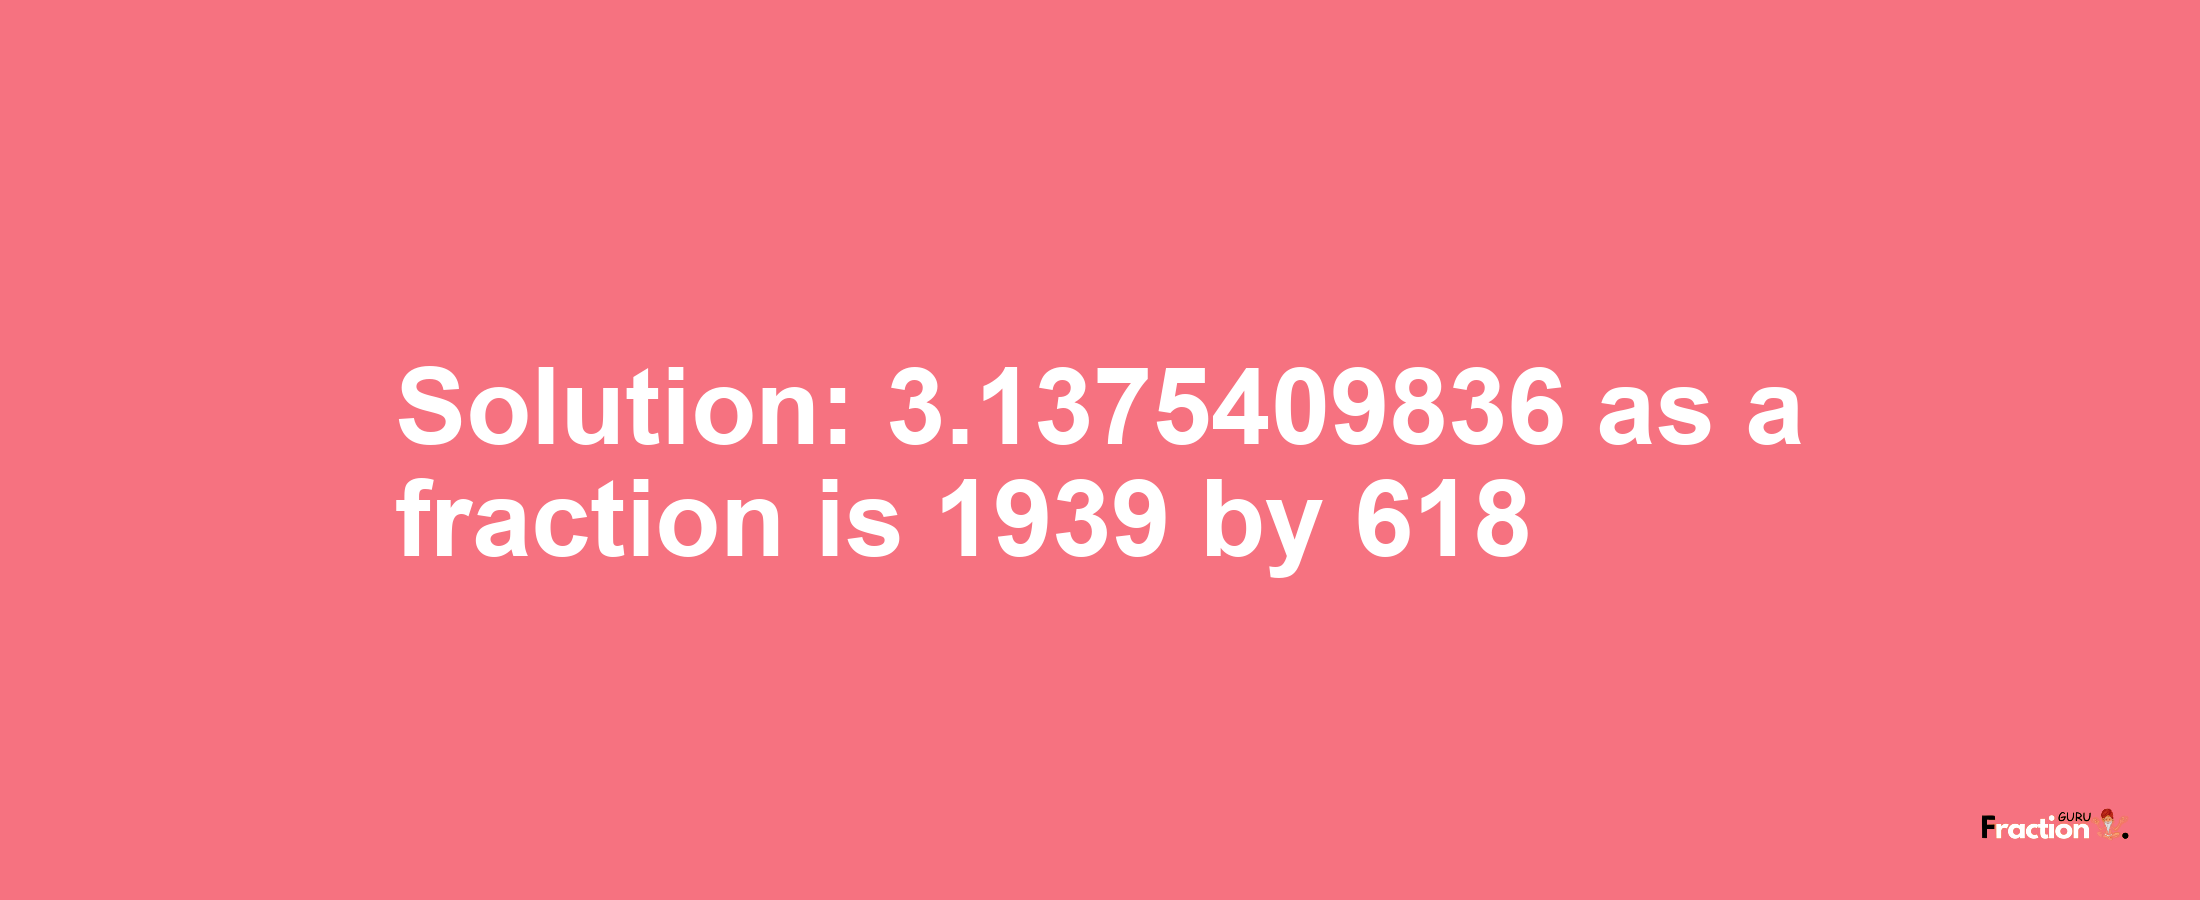 Solution:3.1375409836 as a fraction is 1939/618